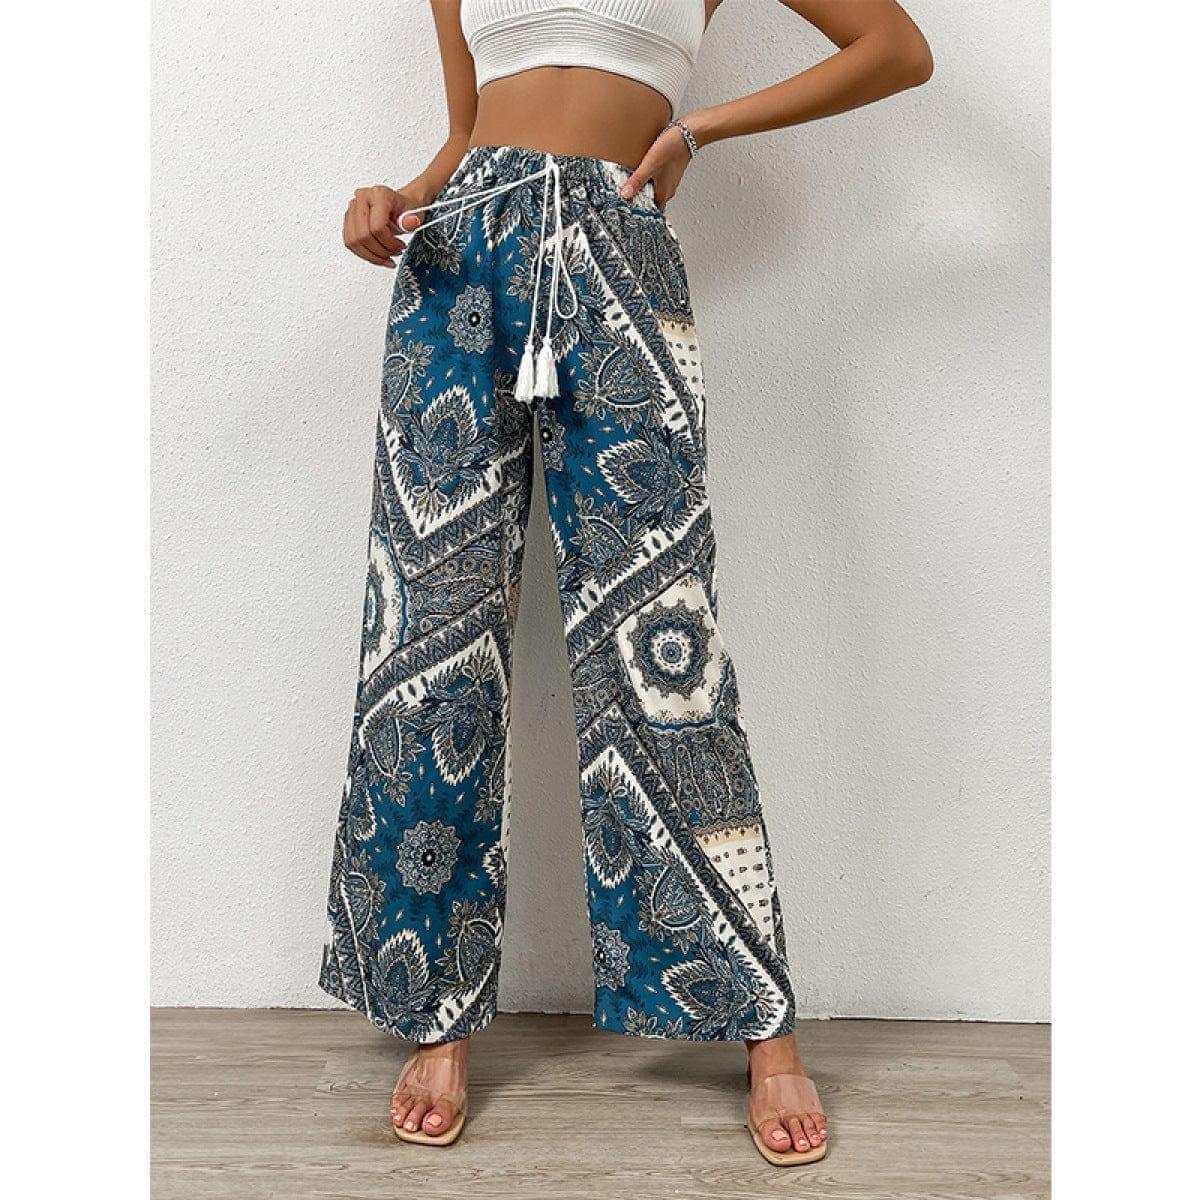 All Over Plants Print Tie Front High Waist Pants